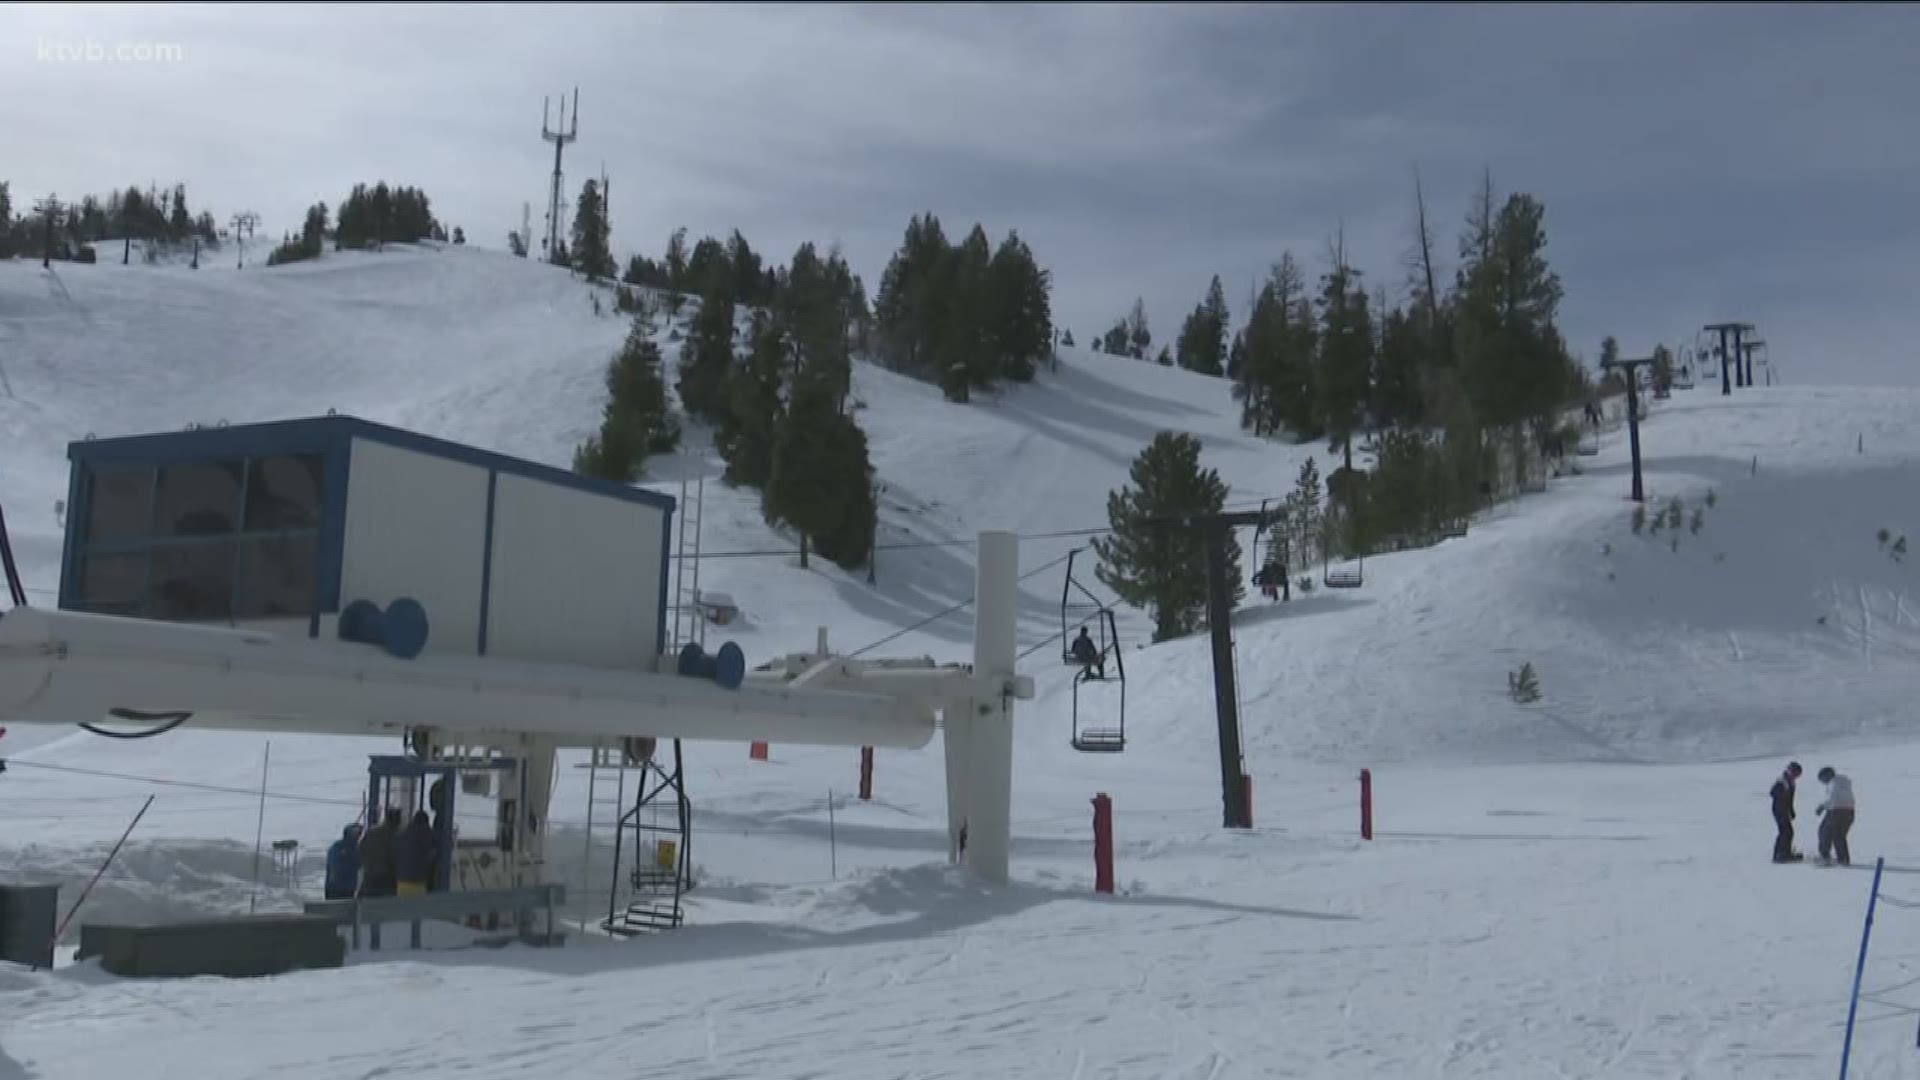 The Boise-area resort has been on a record pace this season, and there's still plenty of time for you to hit the slopes.